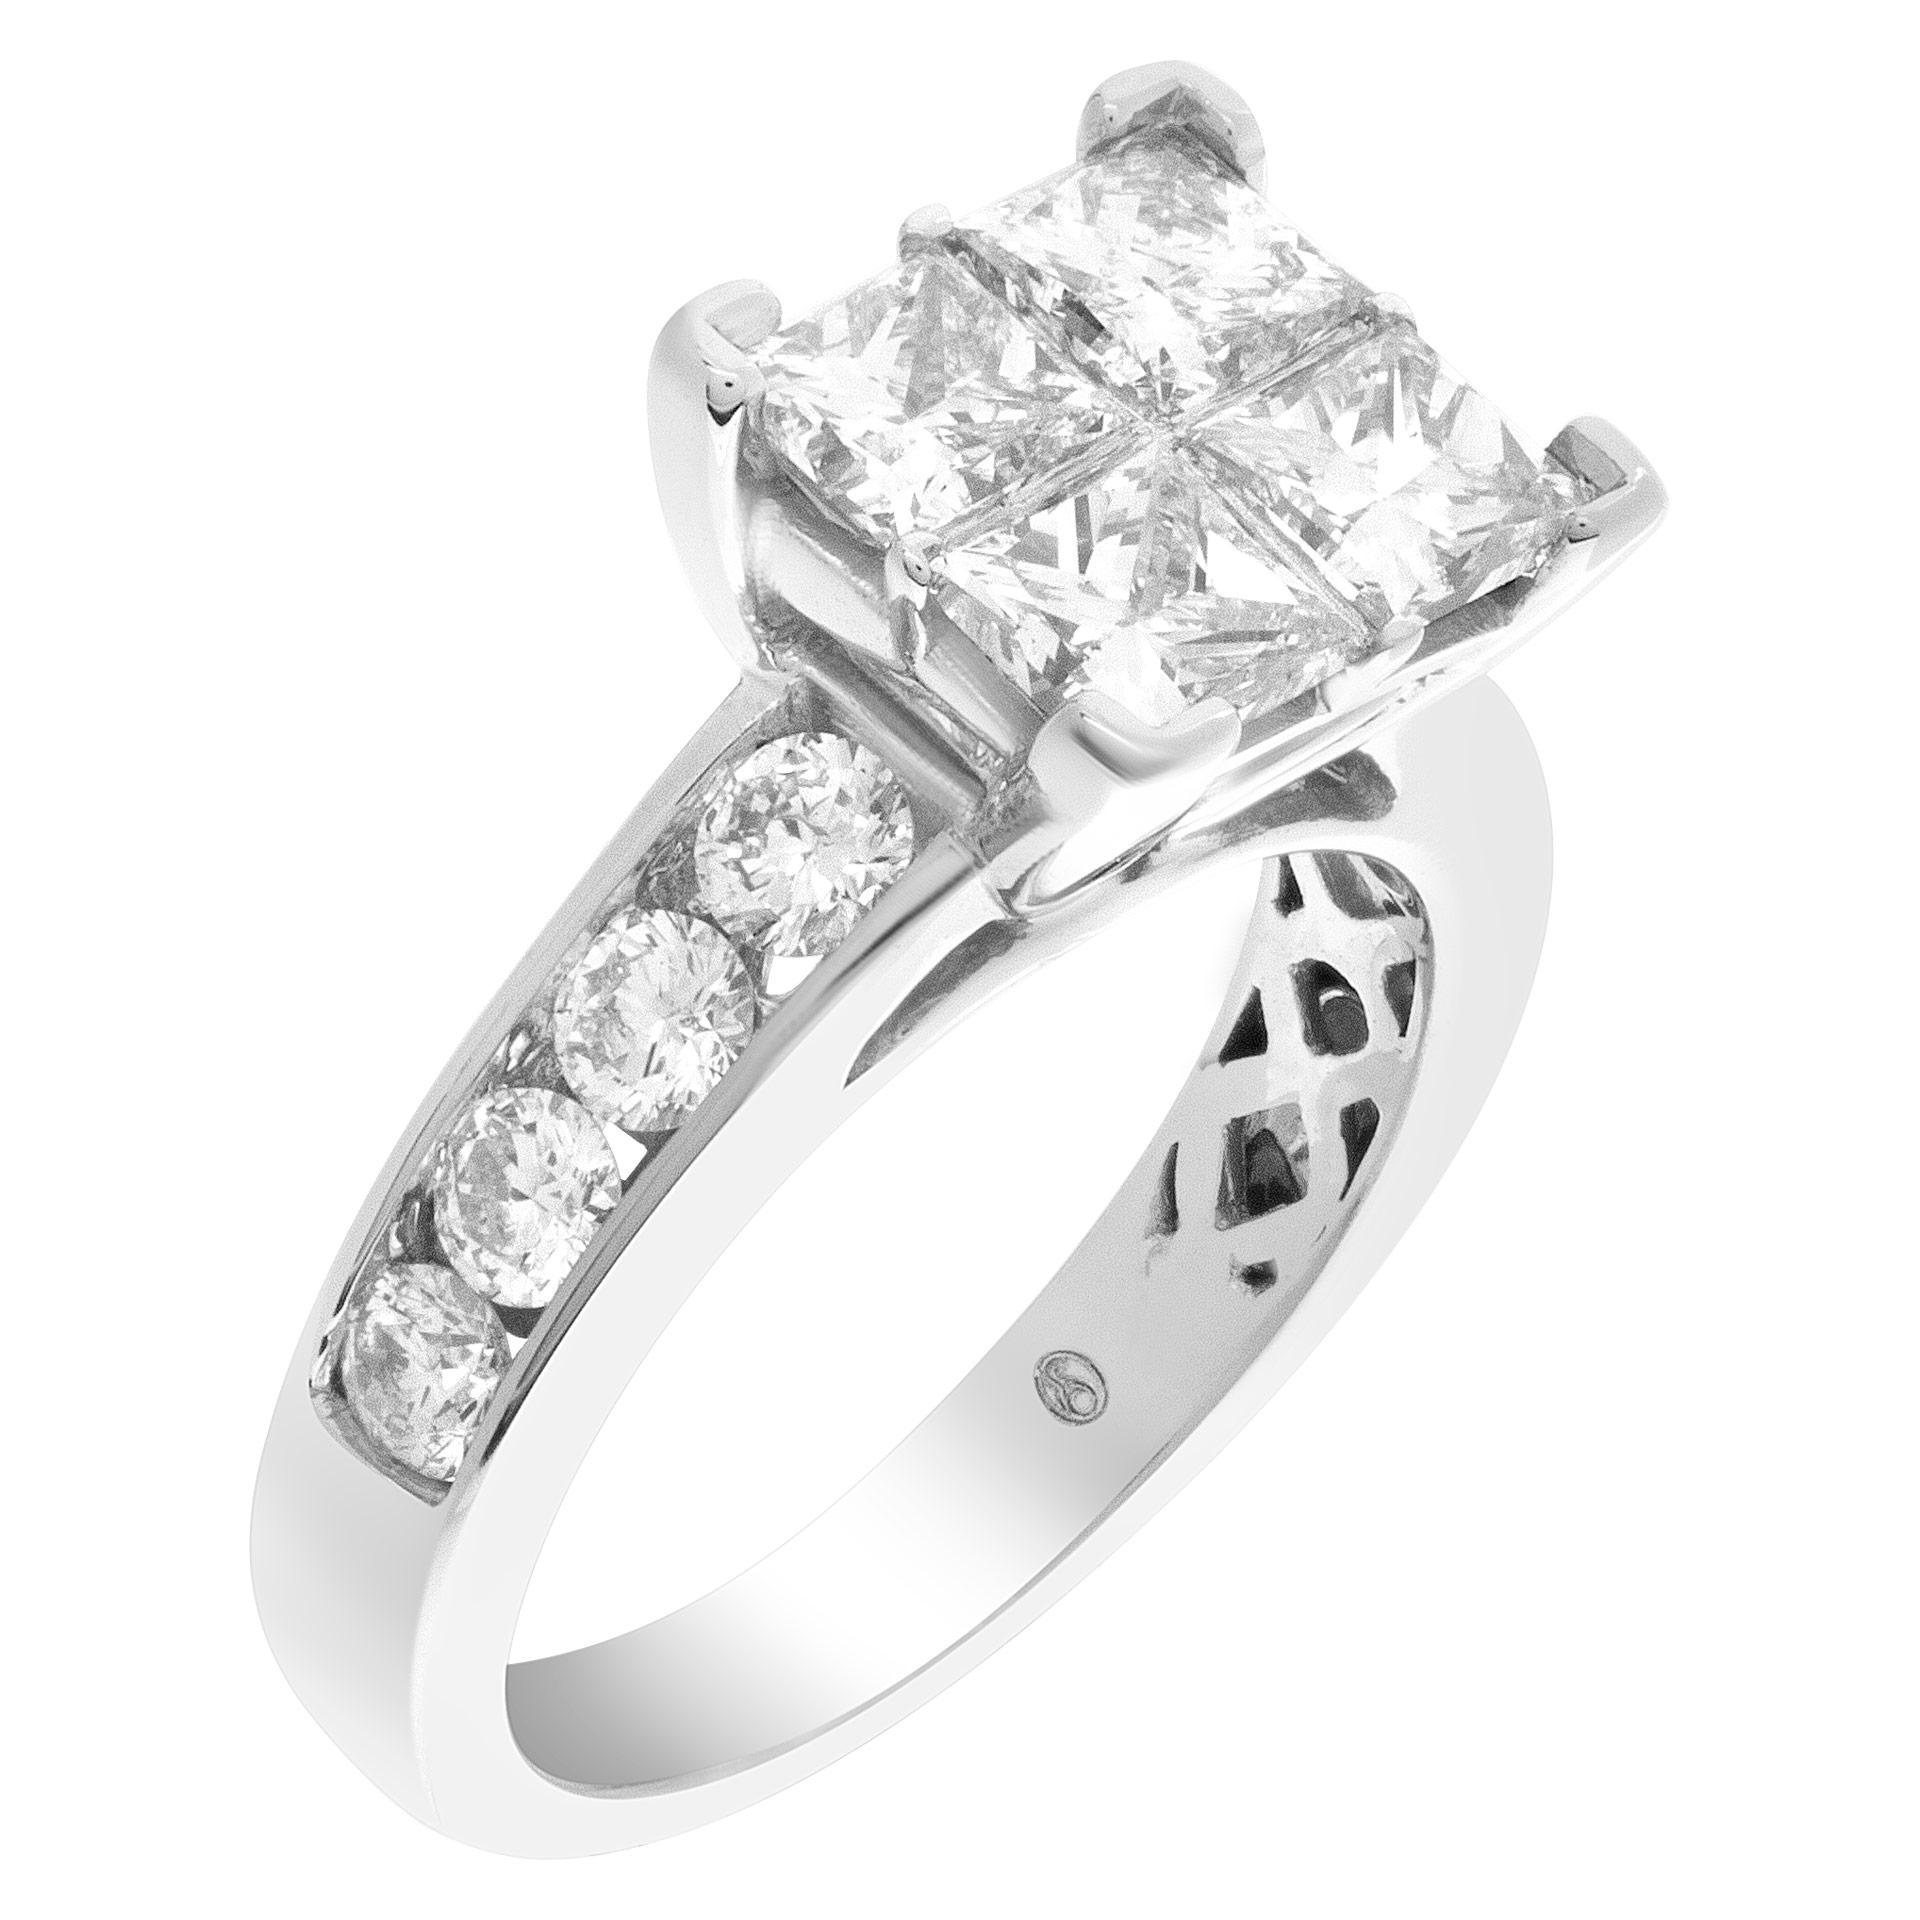 Diamond engagement ring with approximately 1.00 carat in diamonds set in 14k white gold. H-I color, VS-SI clarity. Size 4.75.  This Diamond ring is currently size 4.75 and some items can be sized up or down, please ask! It weighs 3.4 pennyweights